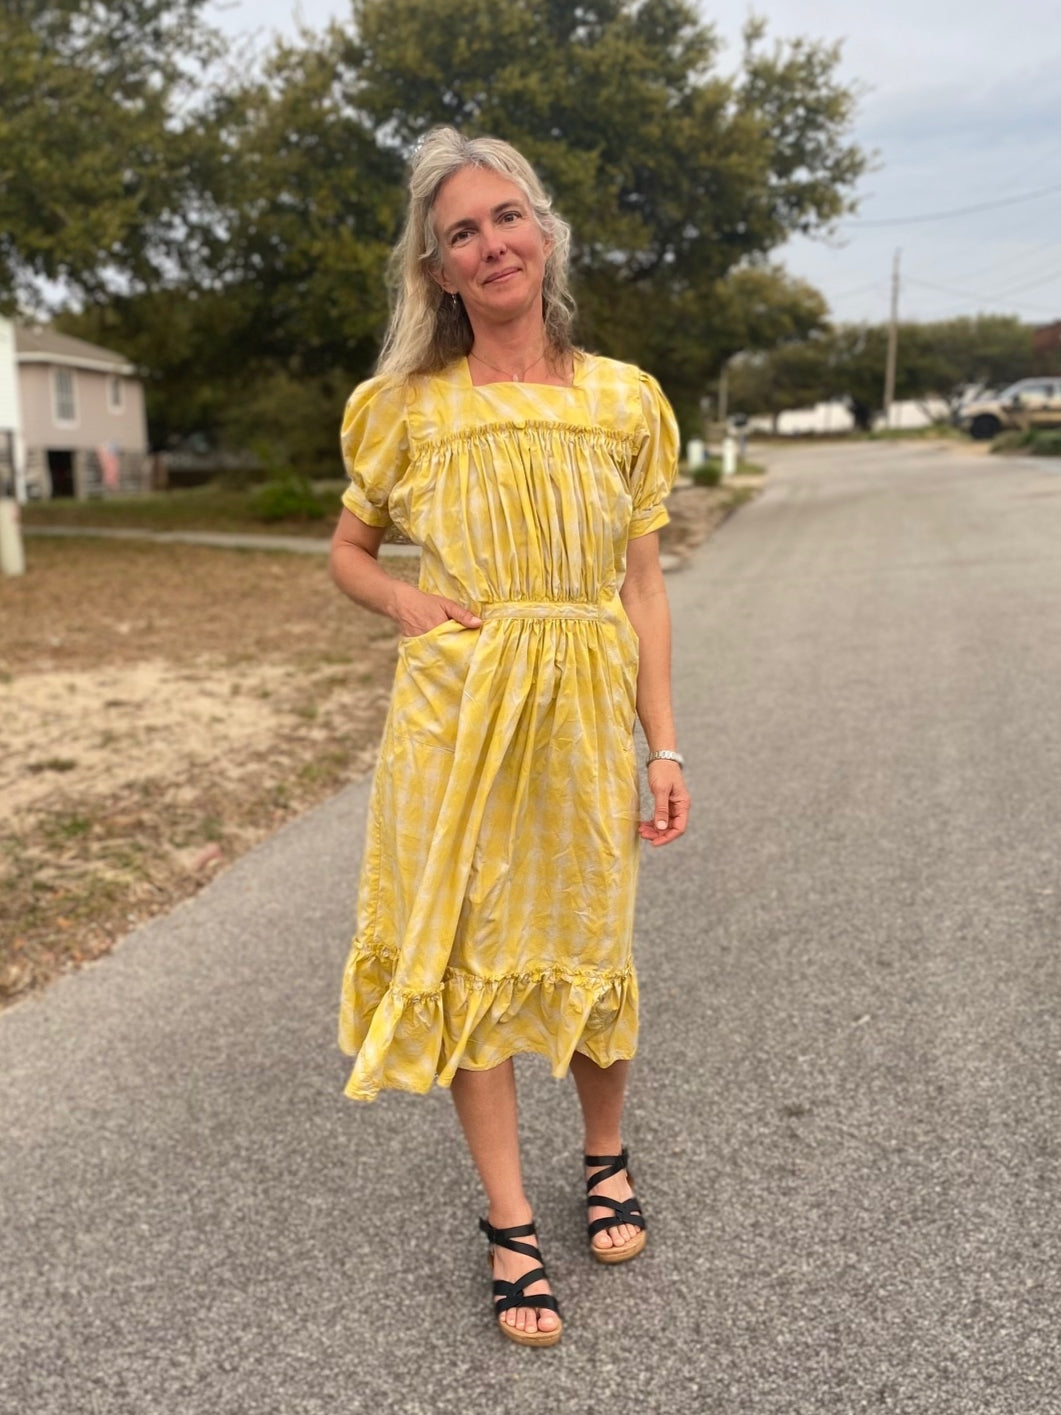 Woman wearing a yellow and white checked calf-length dress with puffed sleeves and pockets.  She is standing in a street and has a hand in her Woman wearing a yellow and white checked calf-length dress with puffed sleeves and pocket.